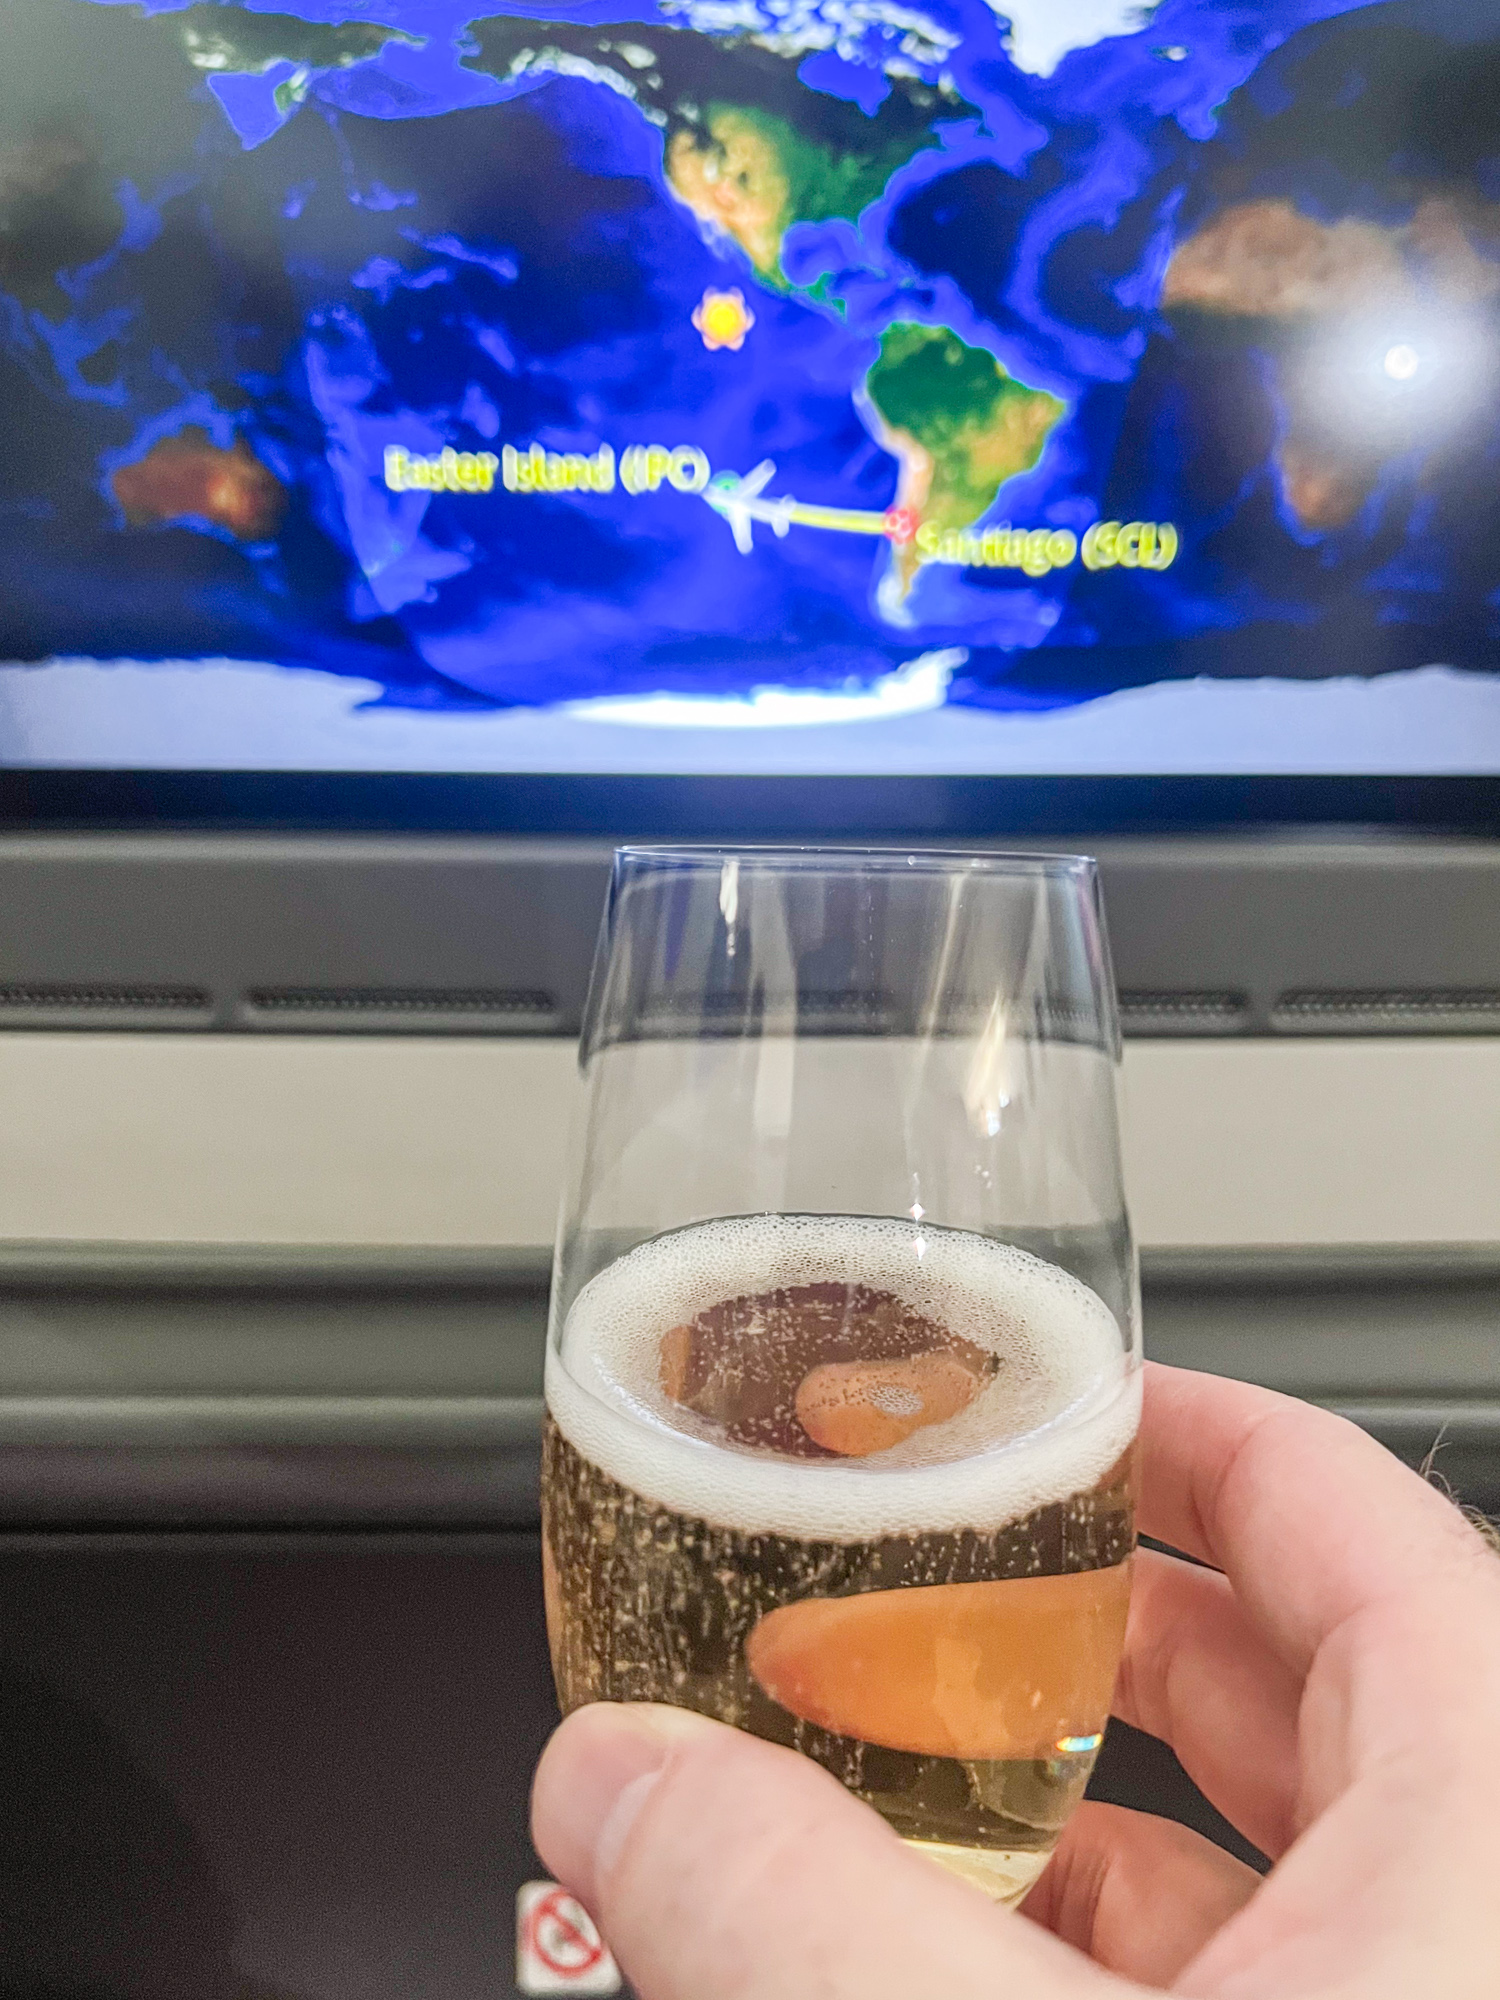 Glass of Champagne Vollereaux Brut Reserve in LATAM Business Class as we approach Easter Island.